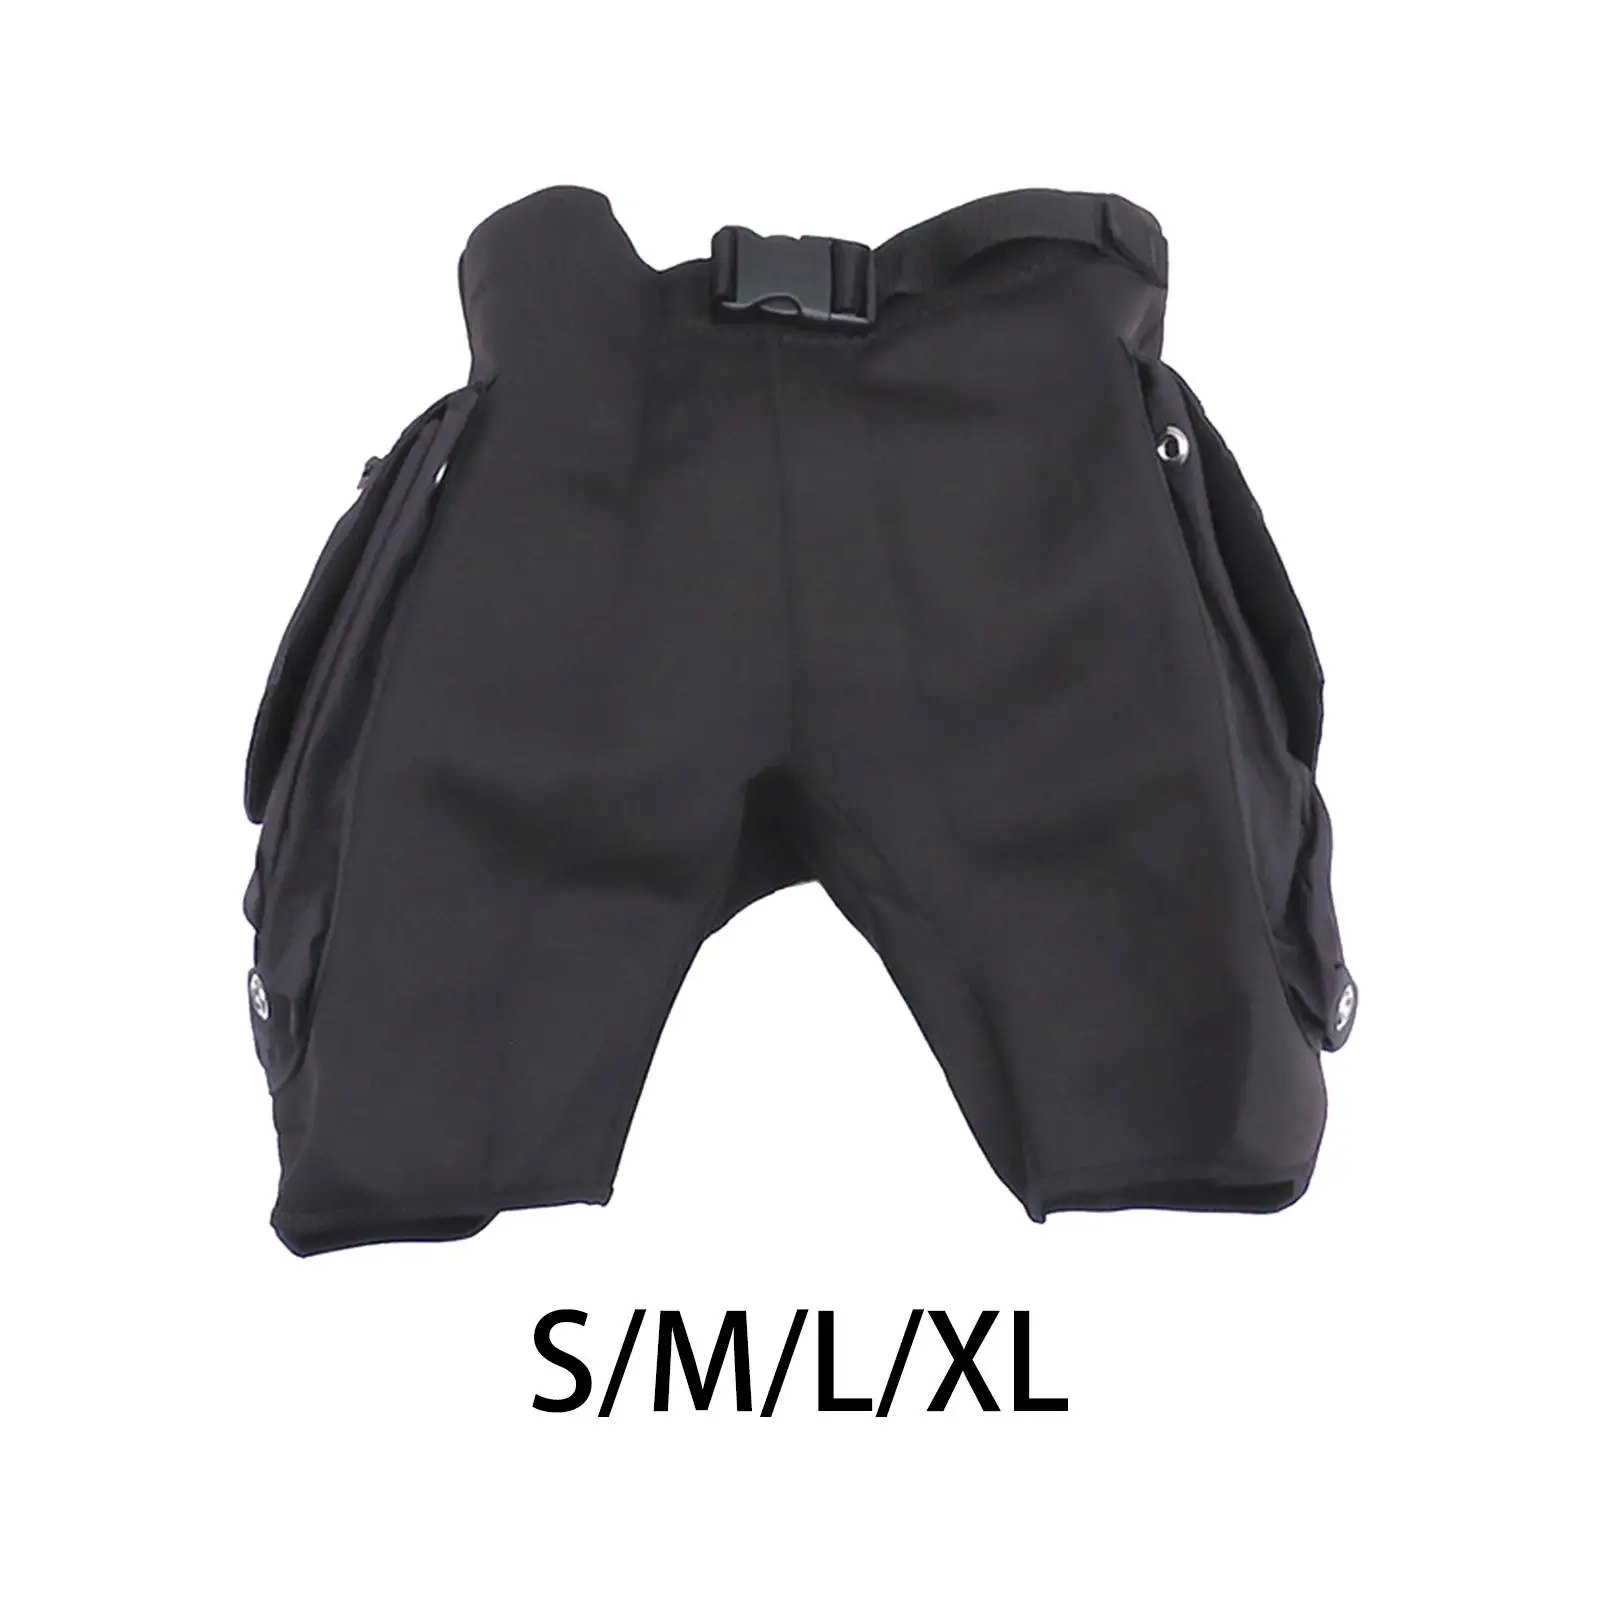 Elastic Wetsuit Pants with Pocket Waistband Swim Trunks Zipper Scuba Diving Shorts for Beach Swimming Surfboard Surfing Fishing